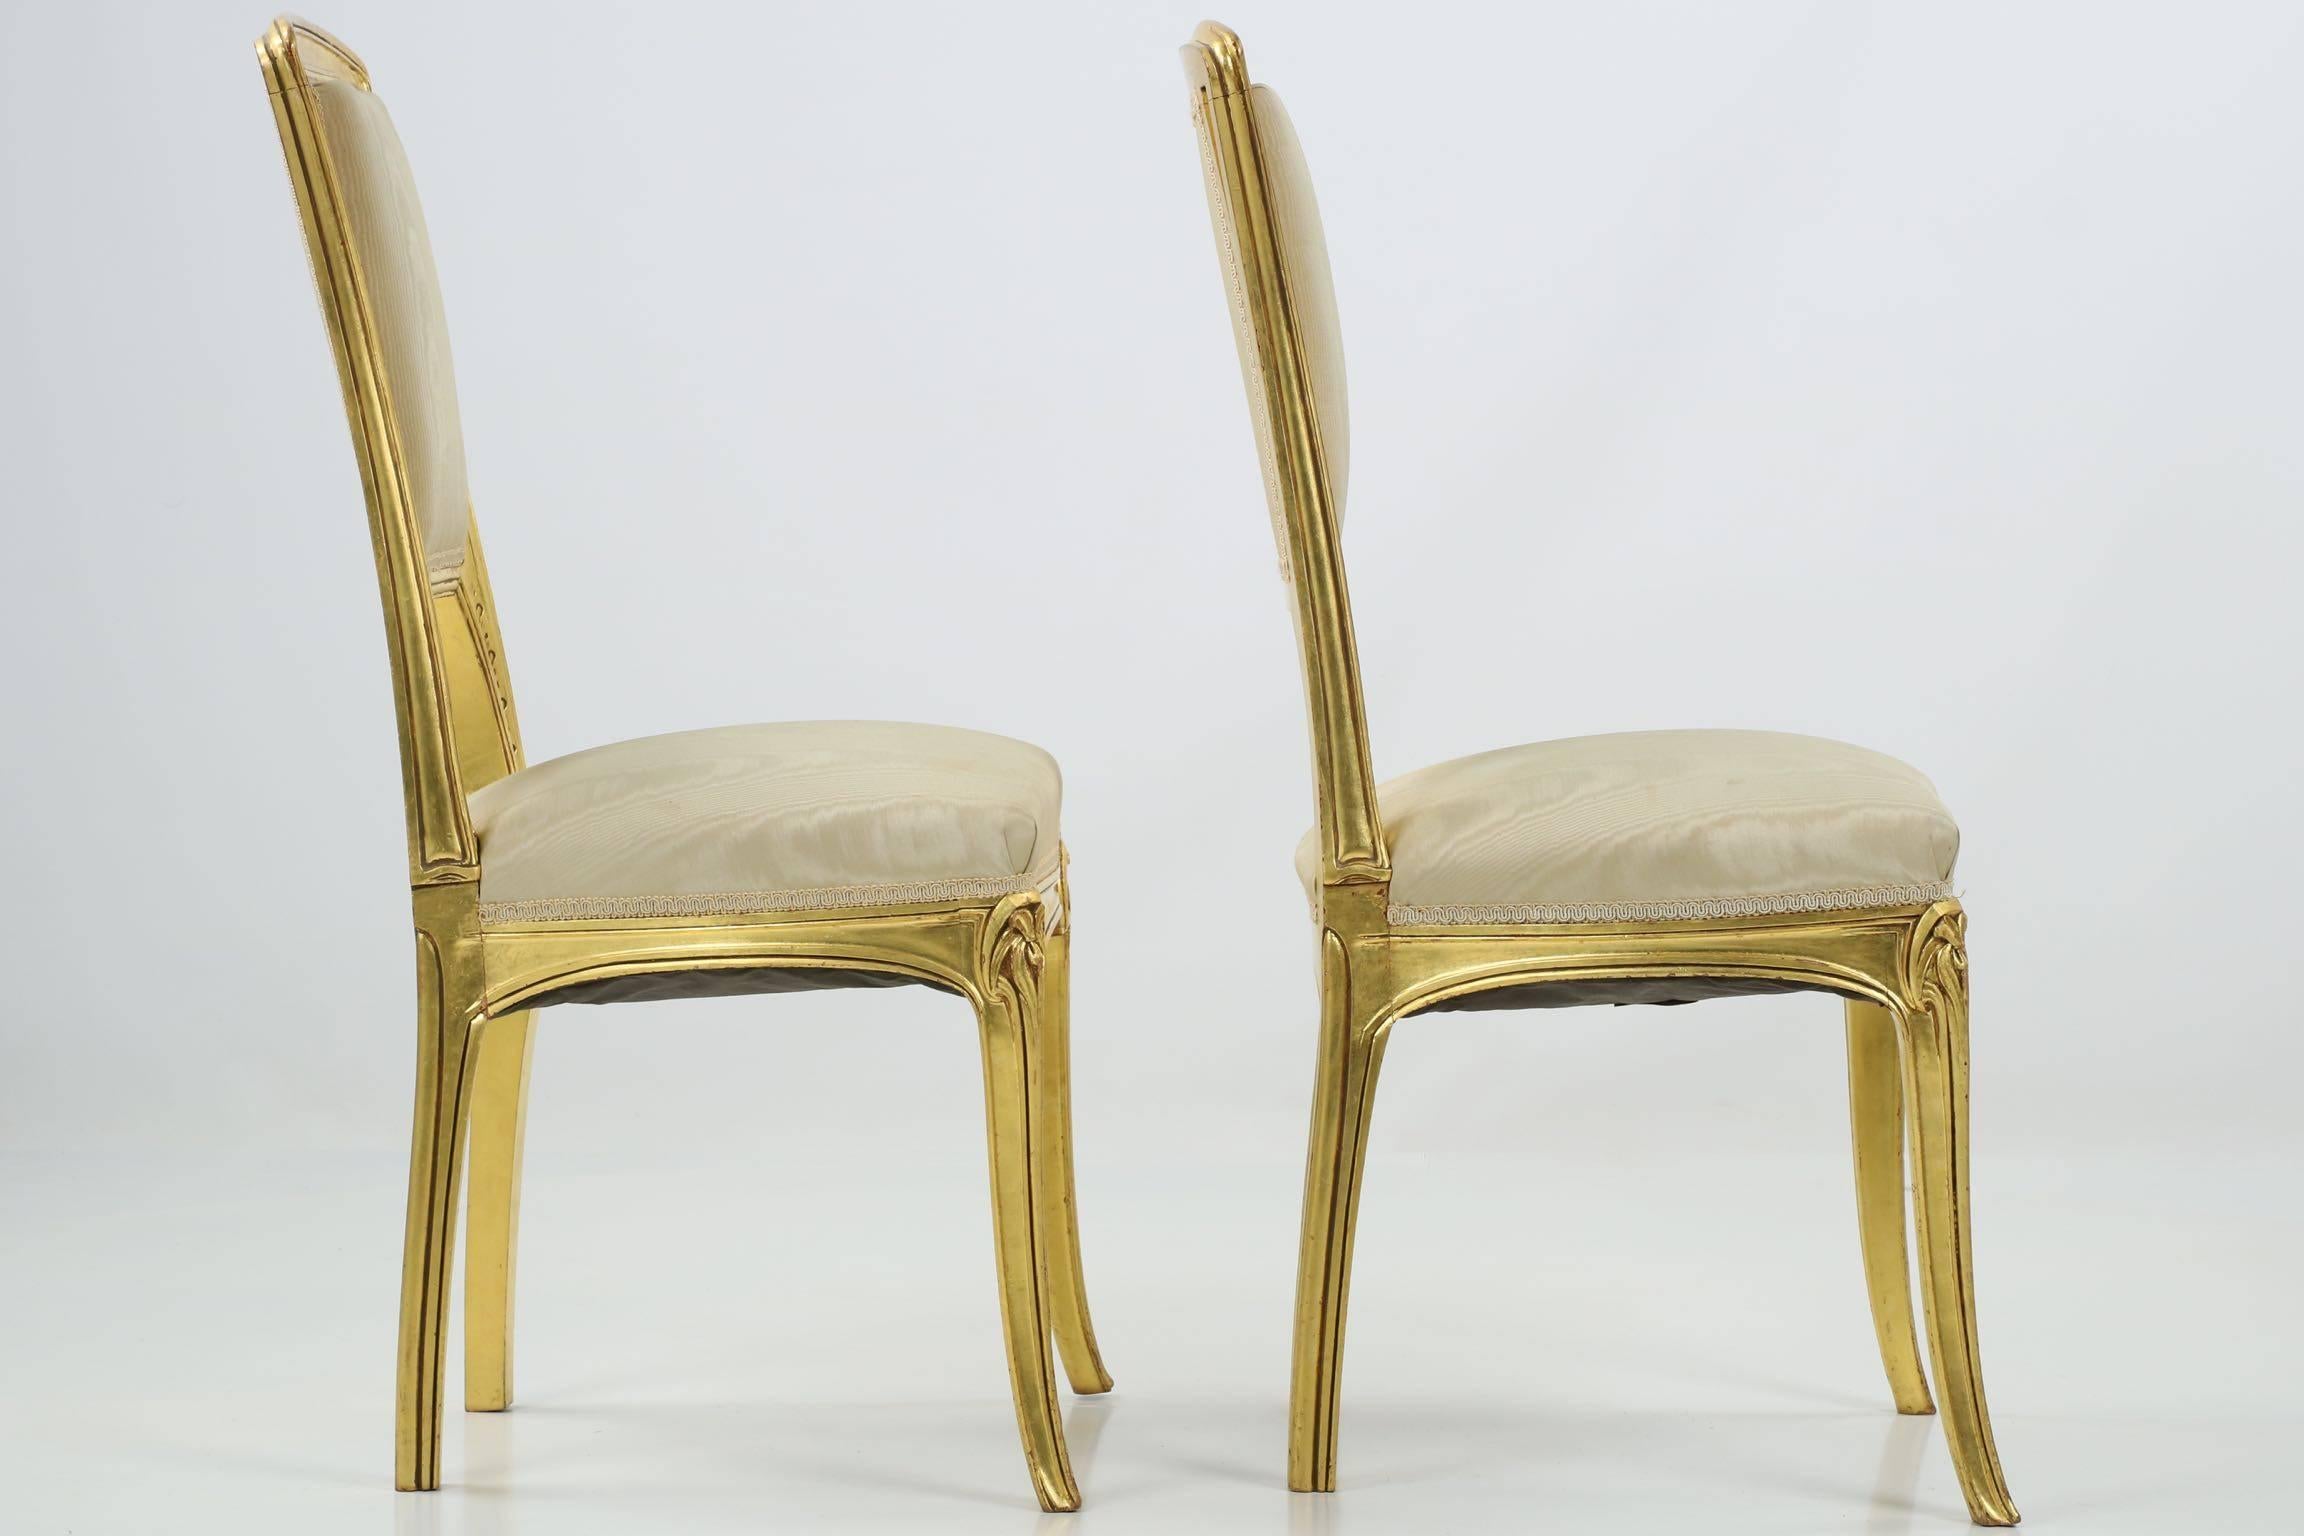 French Art Nouveau Period Pair of Carved Giltwood Antique Side Chairs, 20th Century